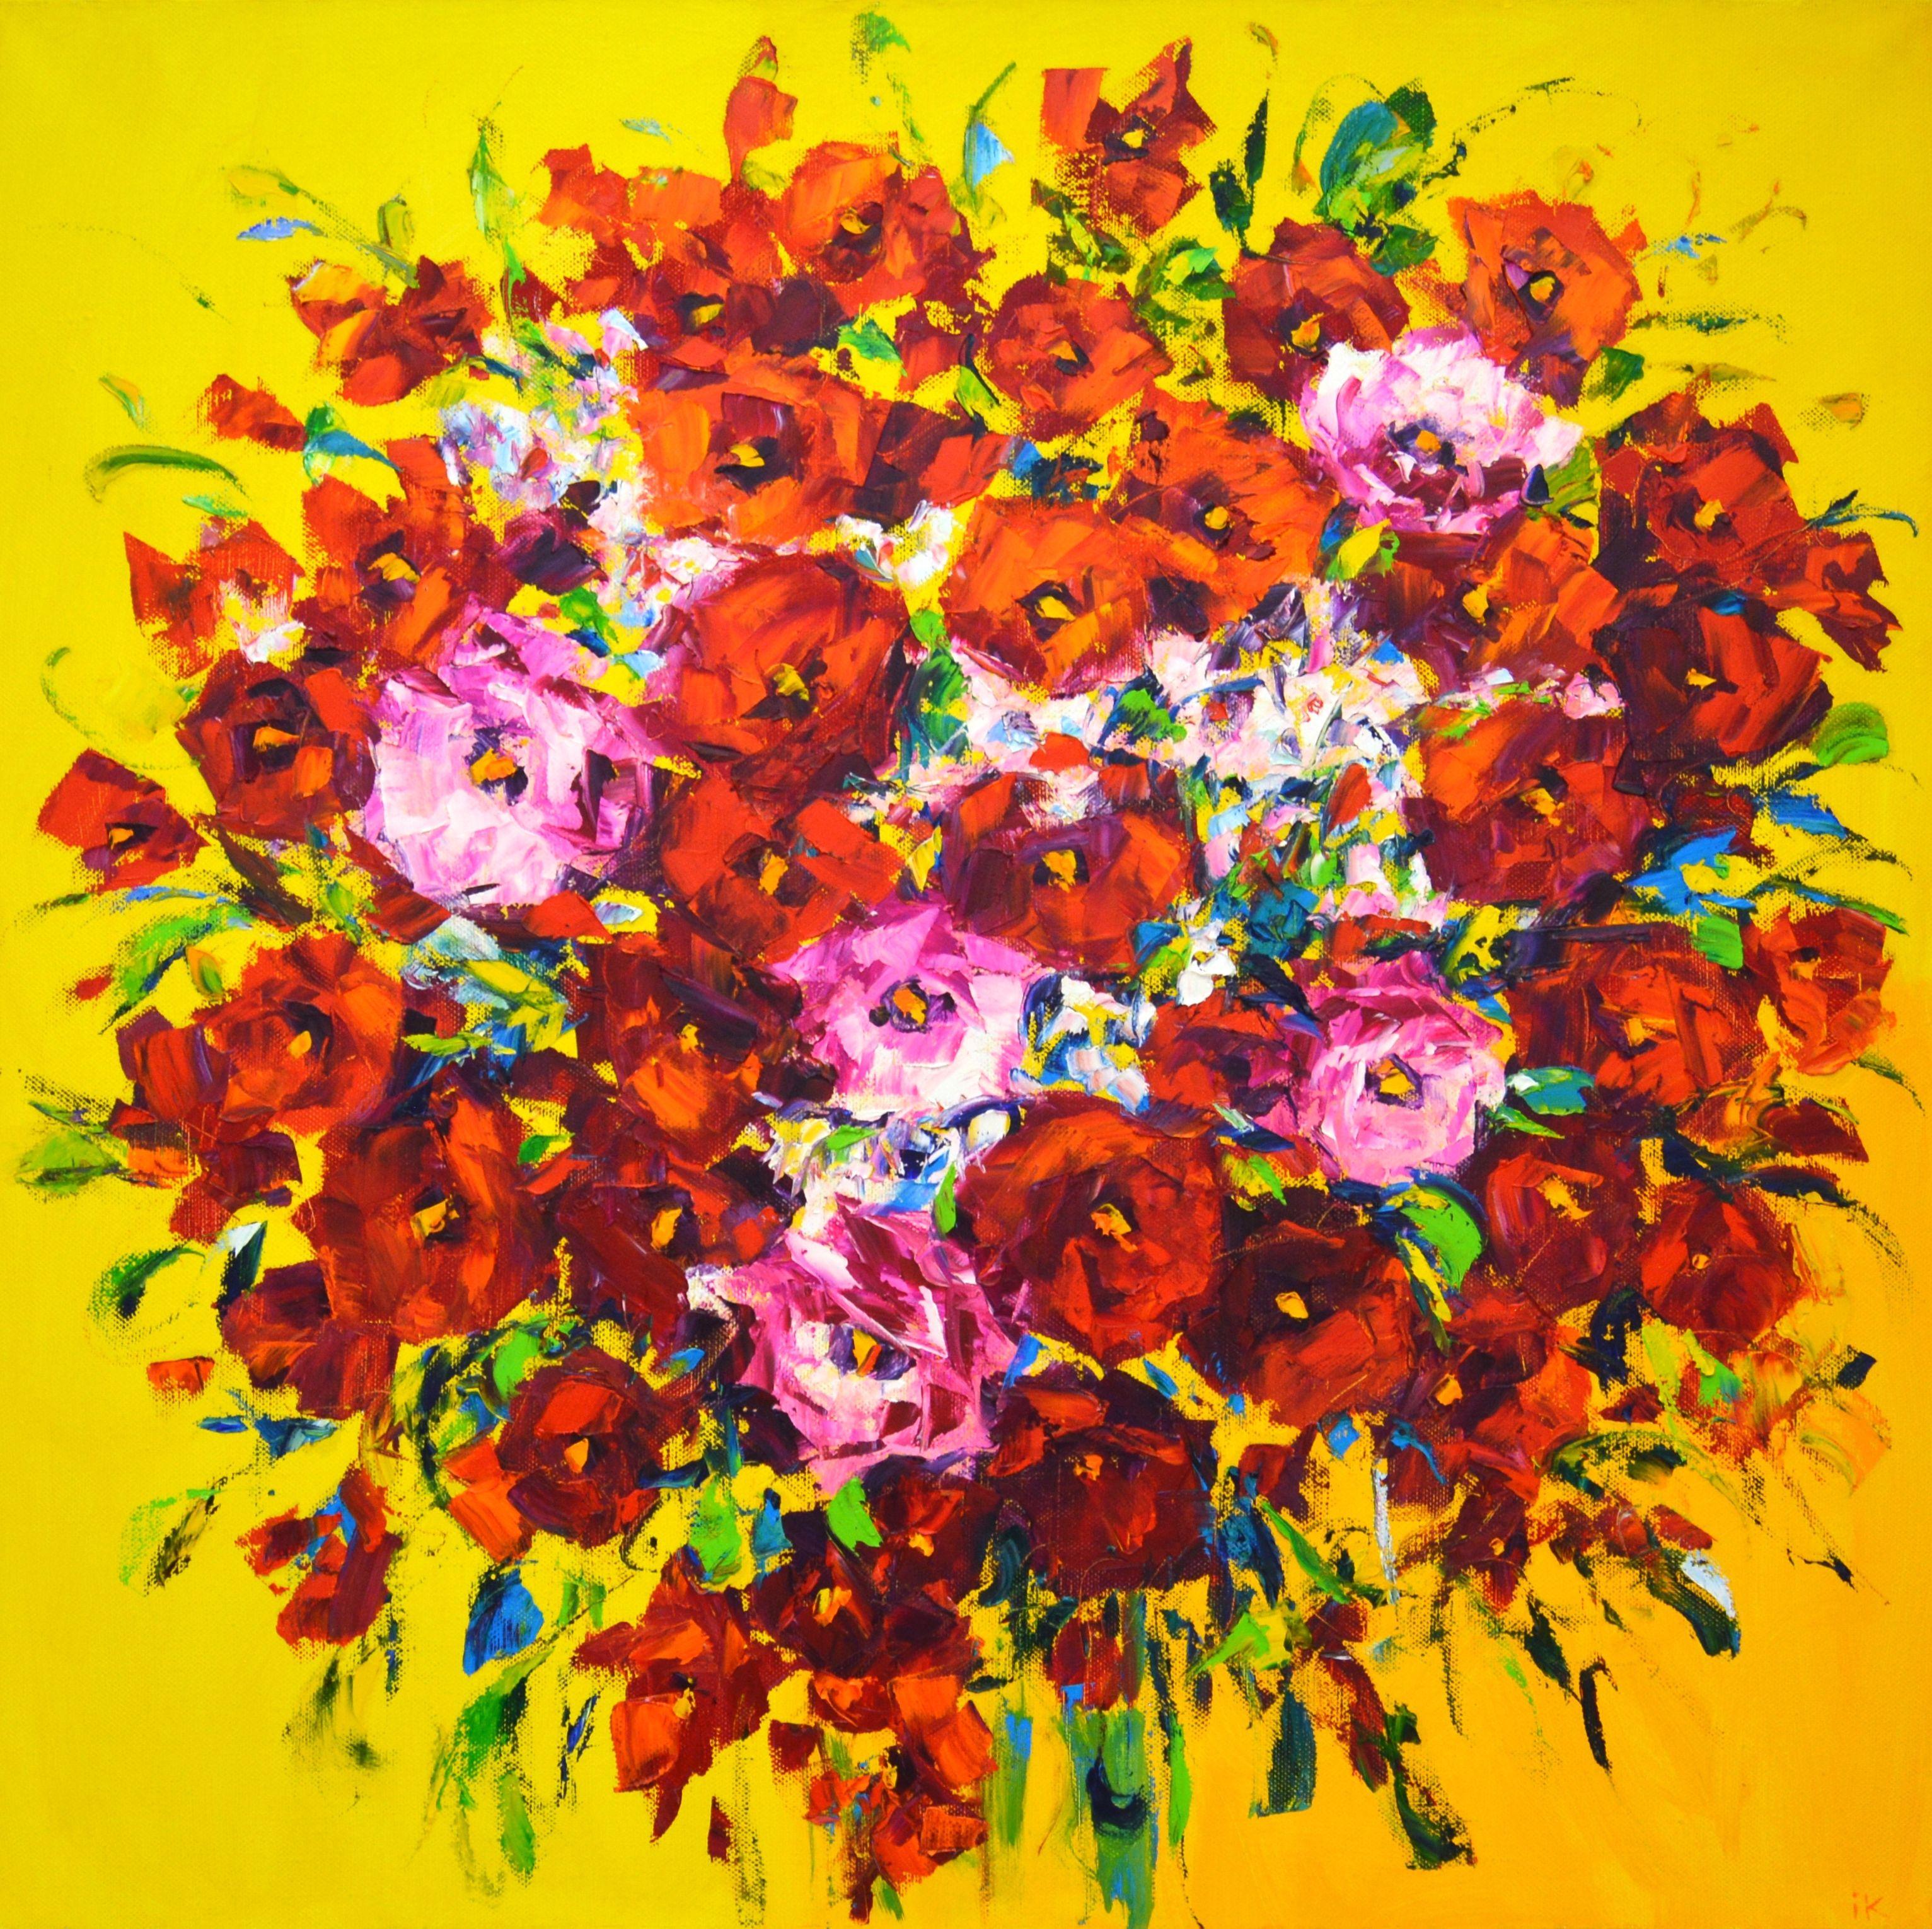 Red lovely. Red, pink and white hibiscus flowers on a bright yellow background, created with brushes and a spatula. The picture is filled with positive, solar energy. Part of a permanent series of floral arrangements. Inspired by flowers, completely